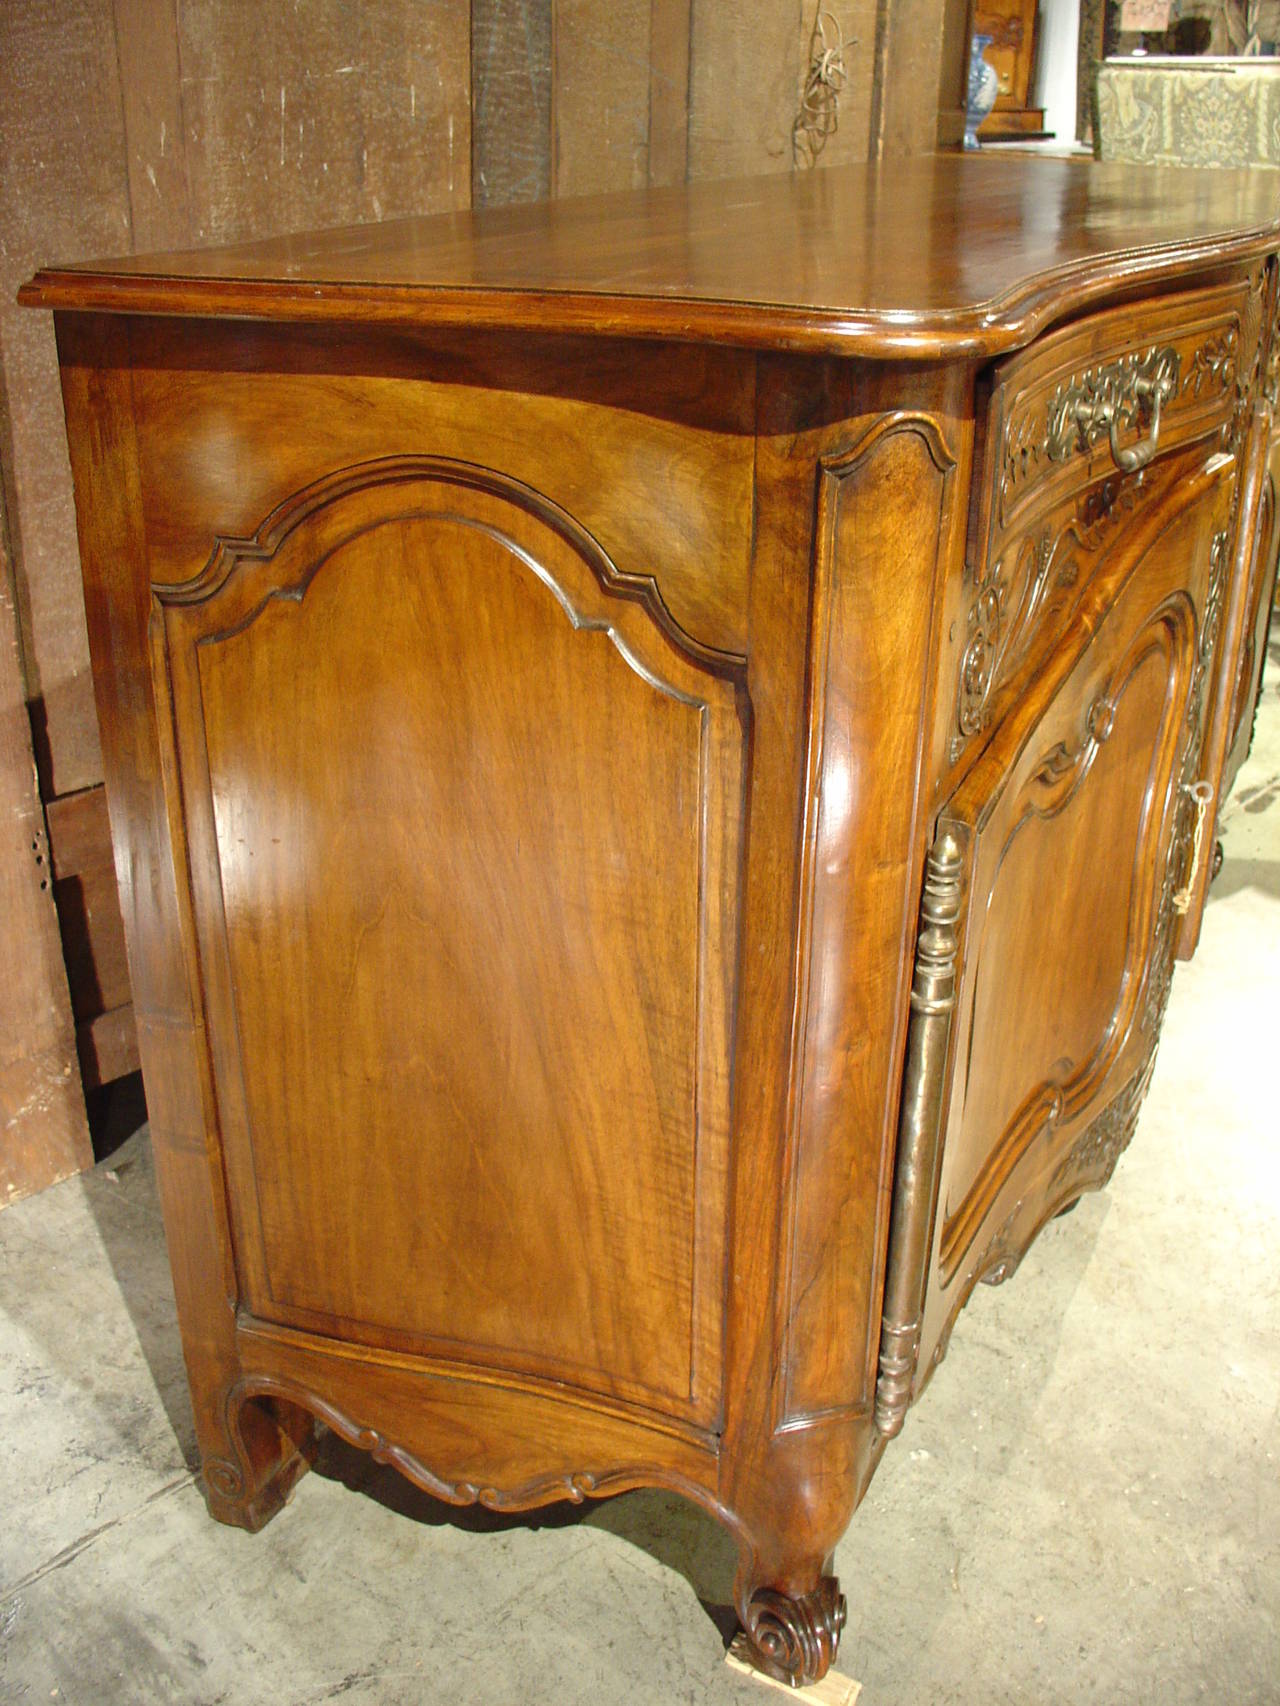 This exquisite large antique French buffet is typical of Provence.  Constructed from French walnut wood, it has two front doors and two drawers, with the left drawer having silverware separators.  The carving on this piece is magnificent and very